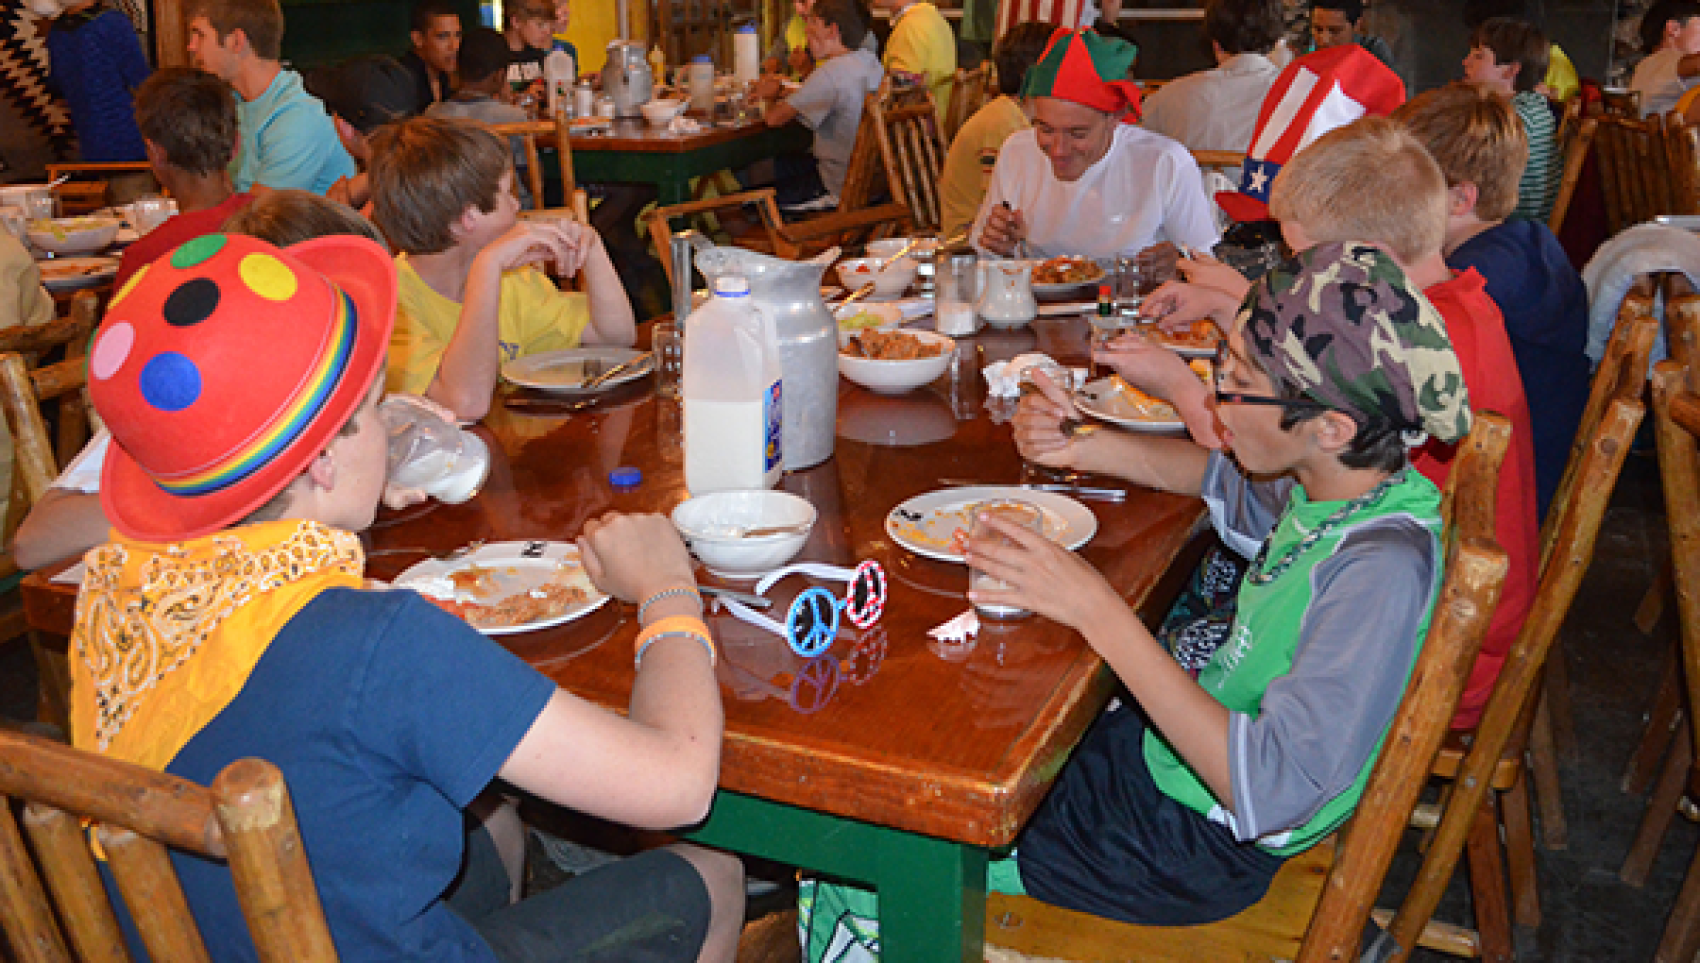 campers and staff eating